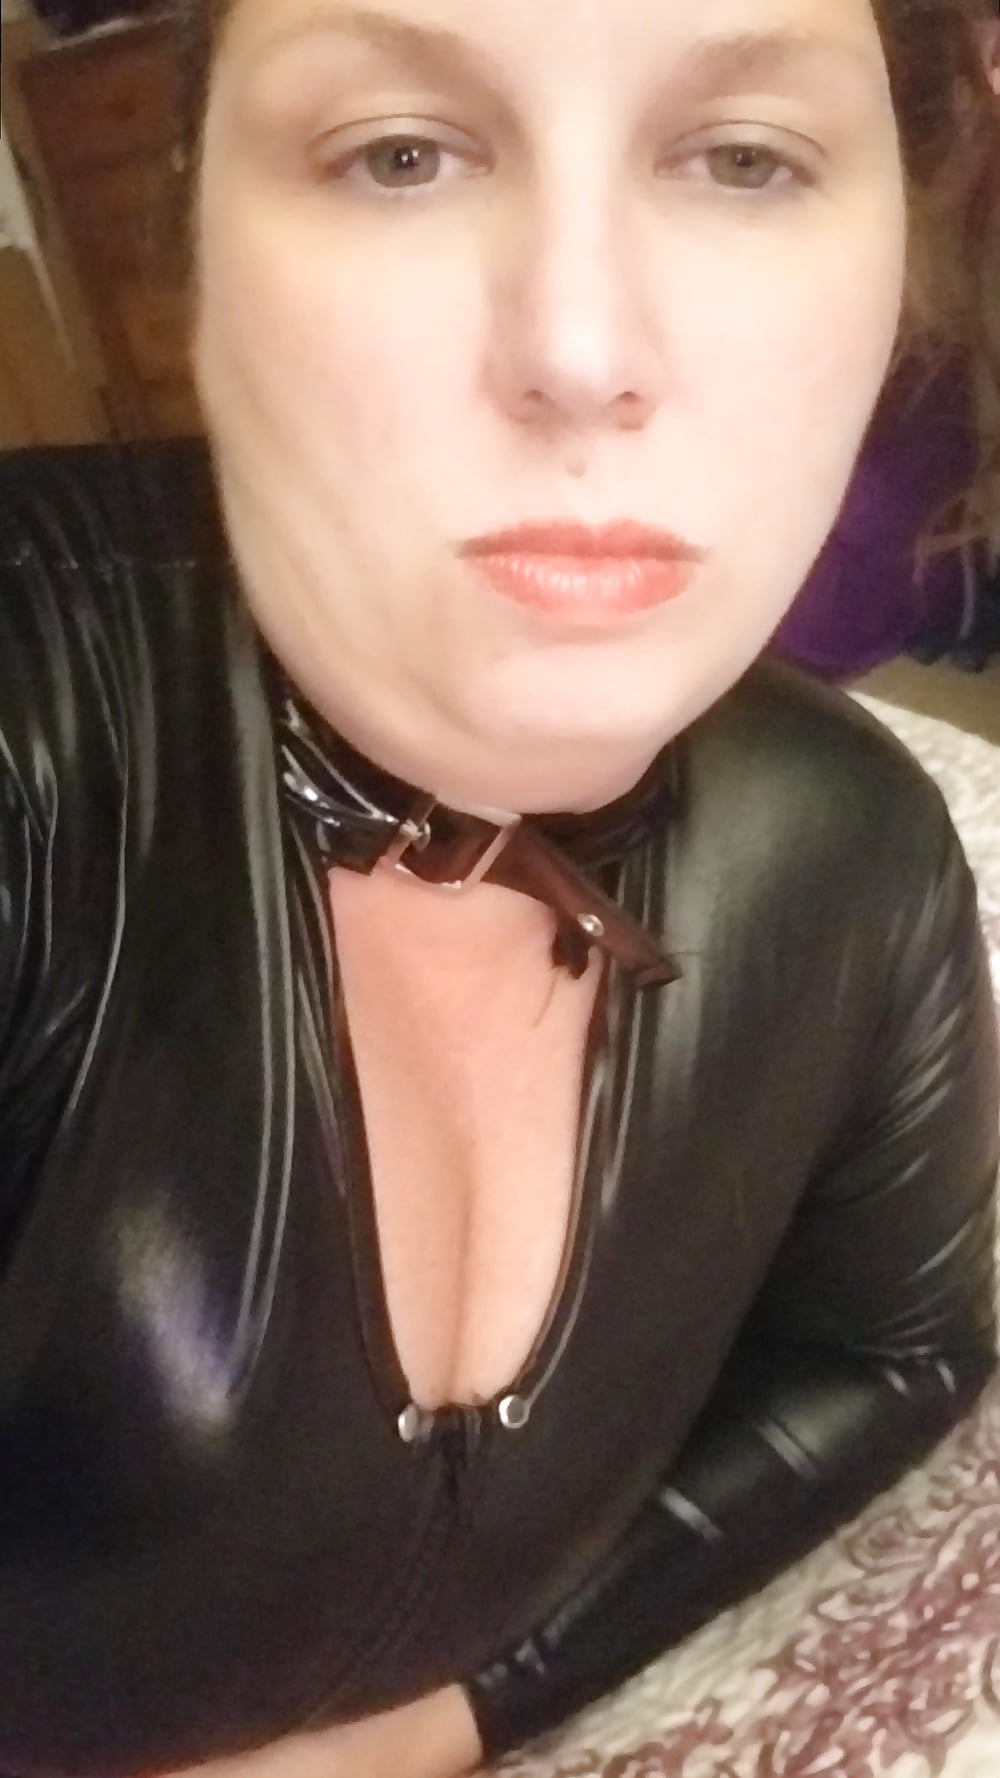 New cat suit birthday surprise for hubby - milf housewife #107184229